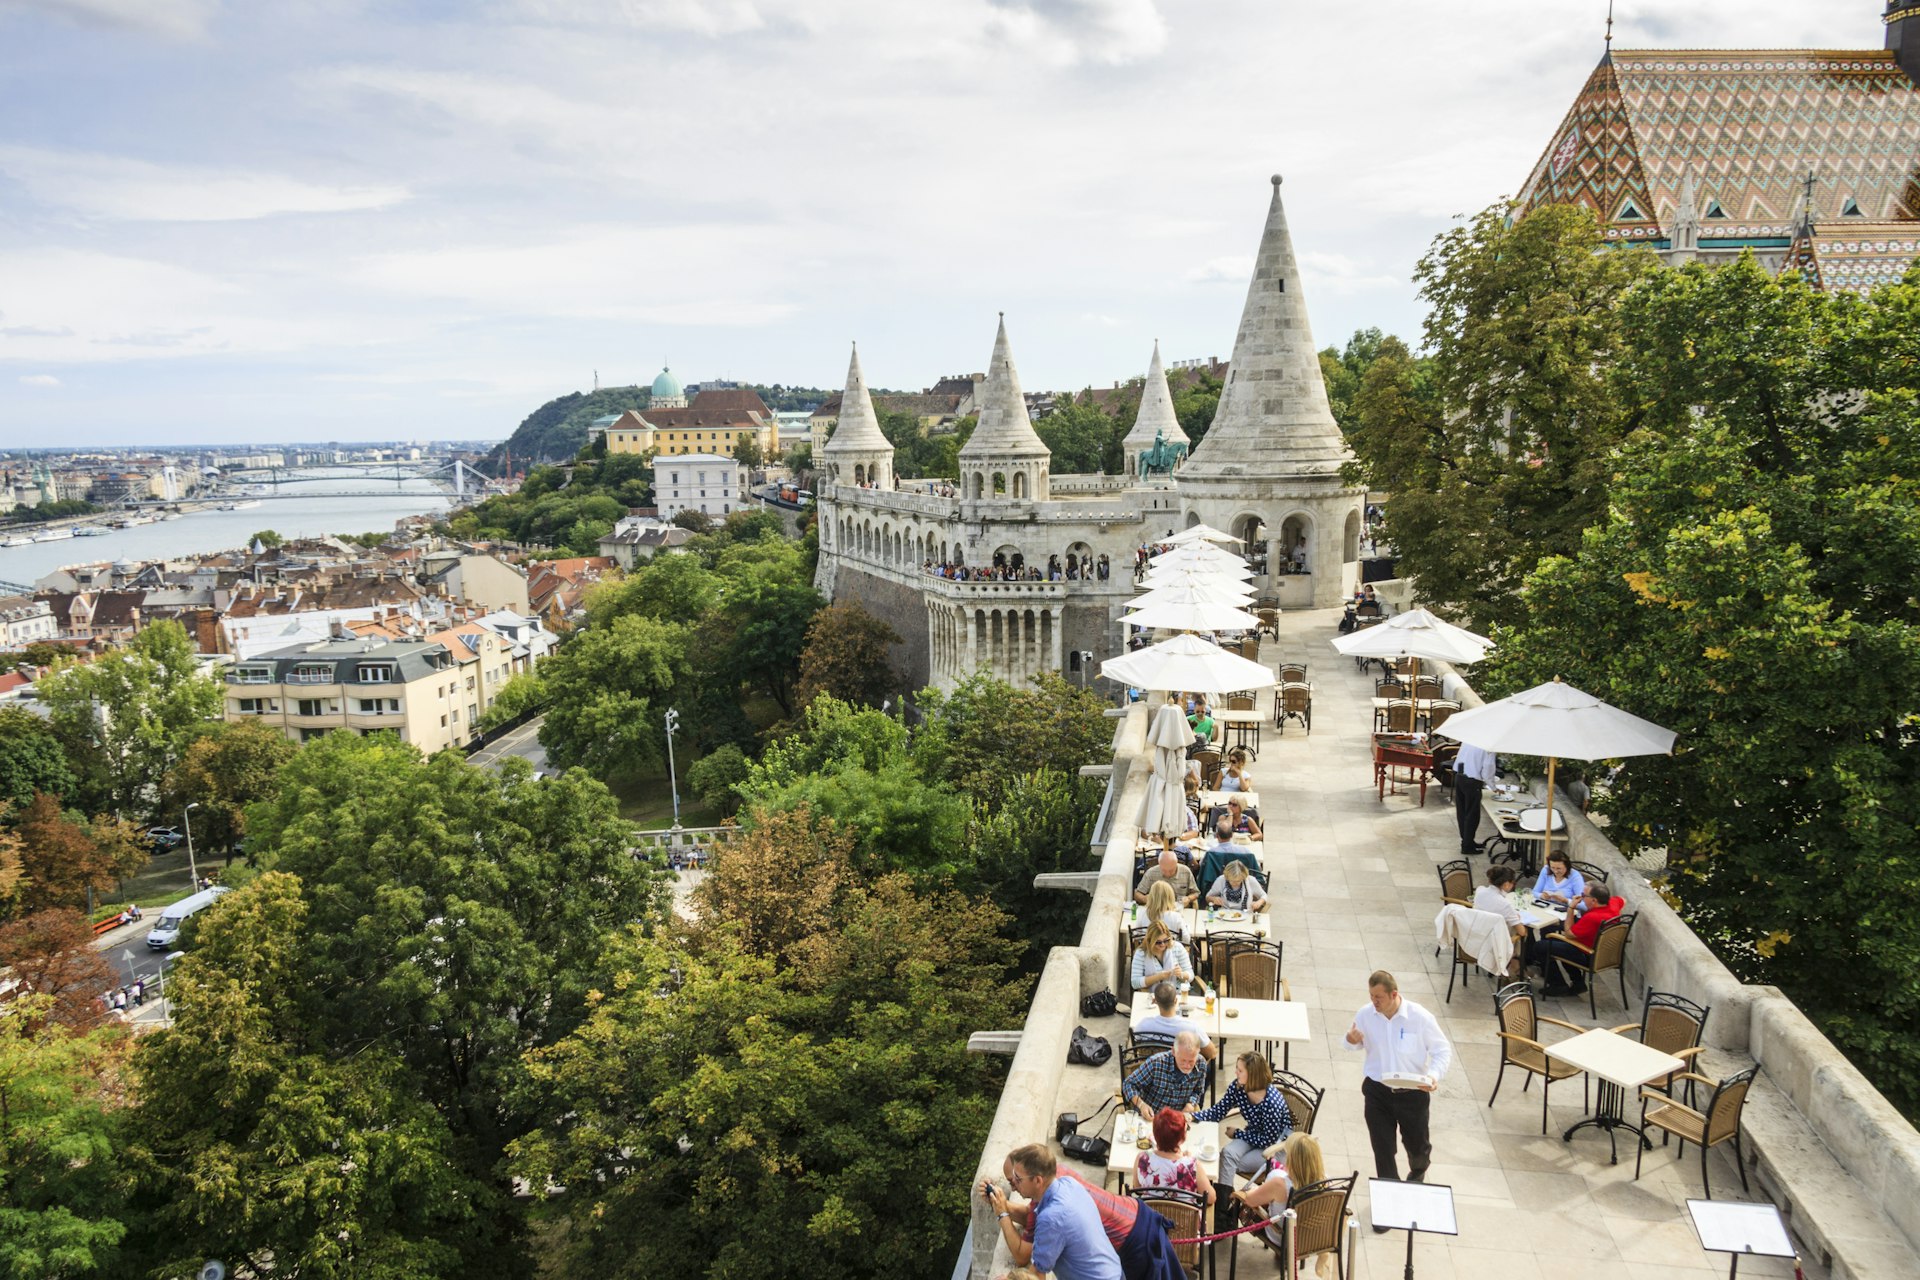 Budapest, Hungary : Lookout terrace restaurant at Fisherman's bastion.